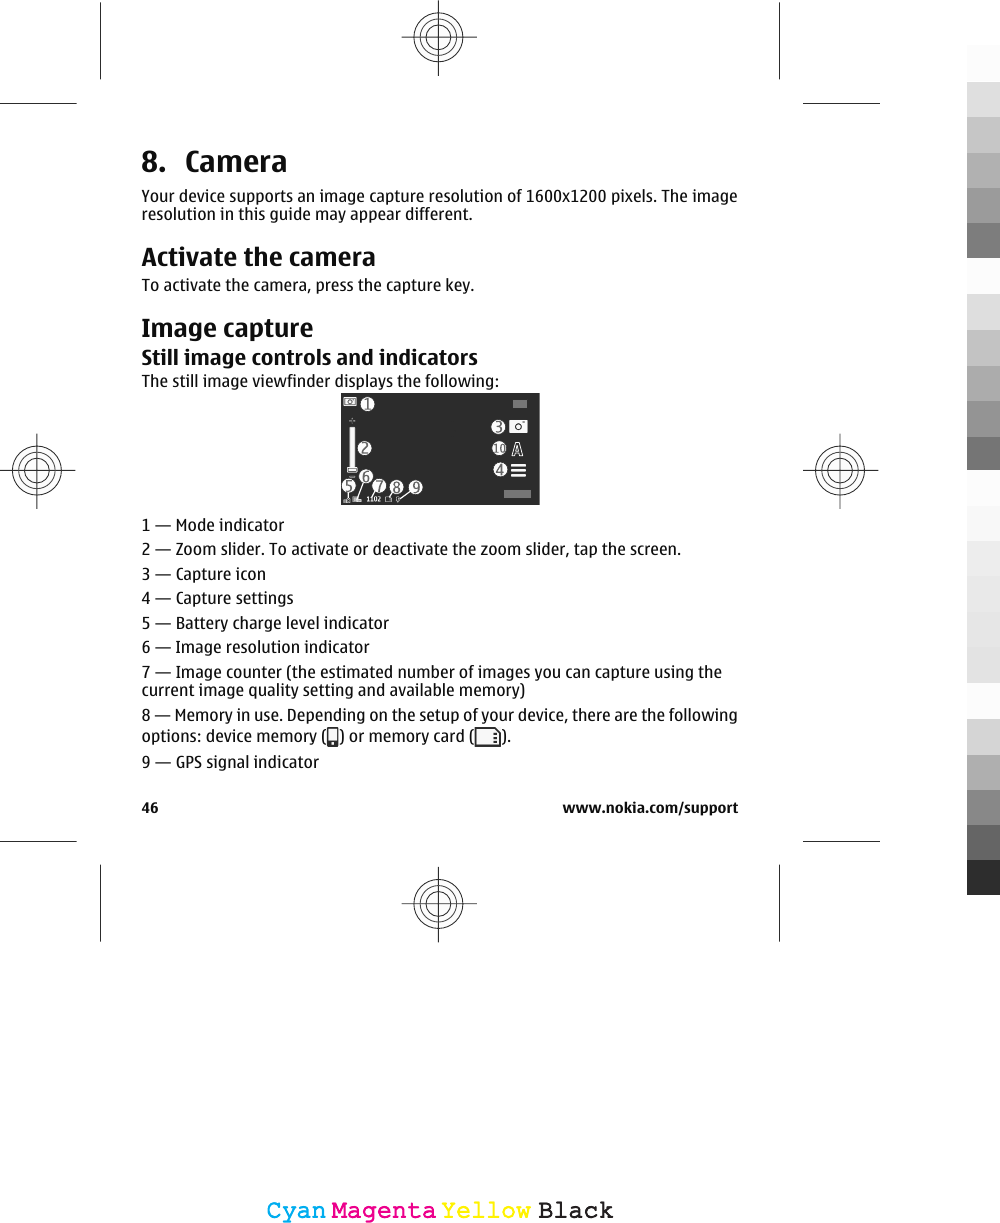 8. CameraYour device supports an image capture resolution of 1600x1200 pixels. The imageresolution in this guide may appear different.Activate the cameraTo activate the camera, press the capture key.Image captureStill image controls and indicatorsThe still image viewfinder displays the following:1 — Mode indicator2 — Zoom slider. To activate or deactivate the zoom slider, tap the screen.3 — Capture icon4 — Capture settings5 — Battery charge level indicator6 — Image resolution indicator7 — Image counter (the estimated number of images you can capture using thecurrent image quality setting and available memory)8 — Memory in use. Depending on the setup of your device, there are the followingoptions: device memory ( ) or memory card ( ).9 — GPS signal indicator46 www.nokia.com/supportCyanCyanMagentaMagentaYellowYellowBlackBlack